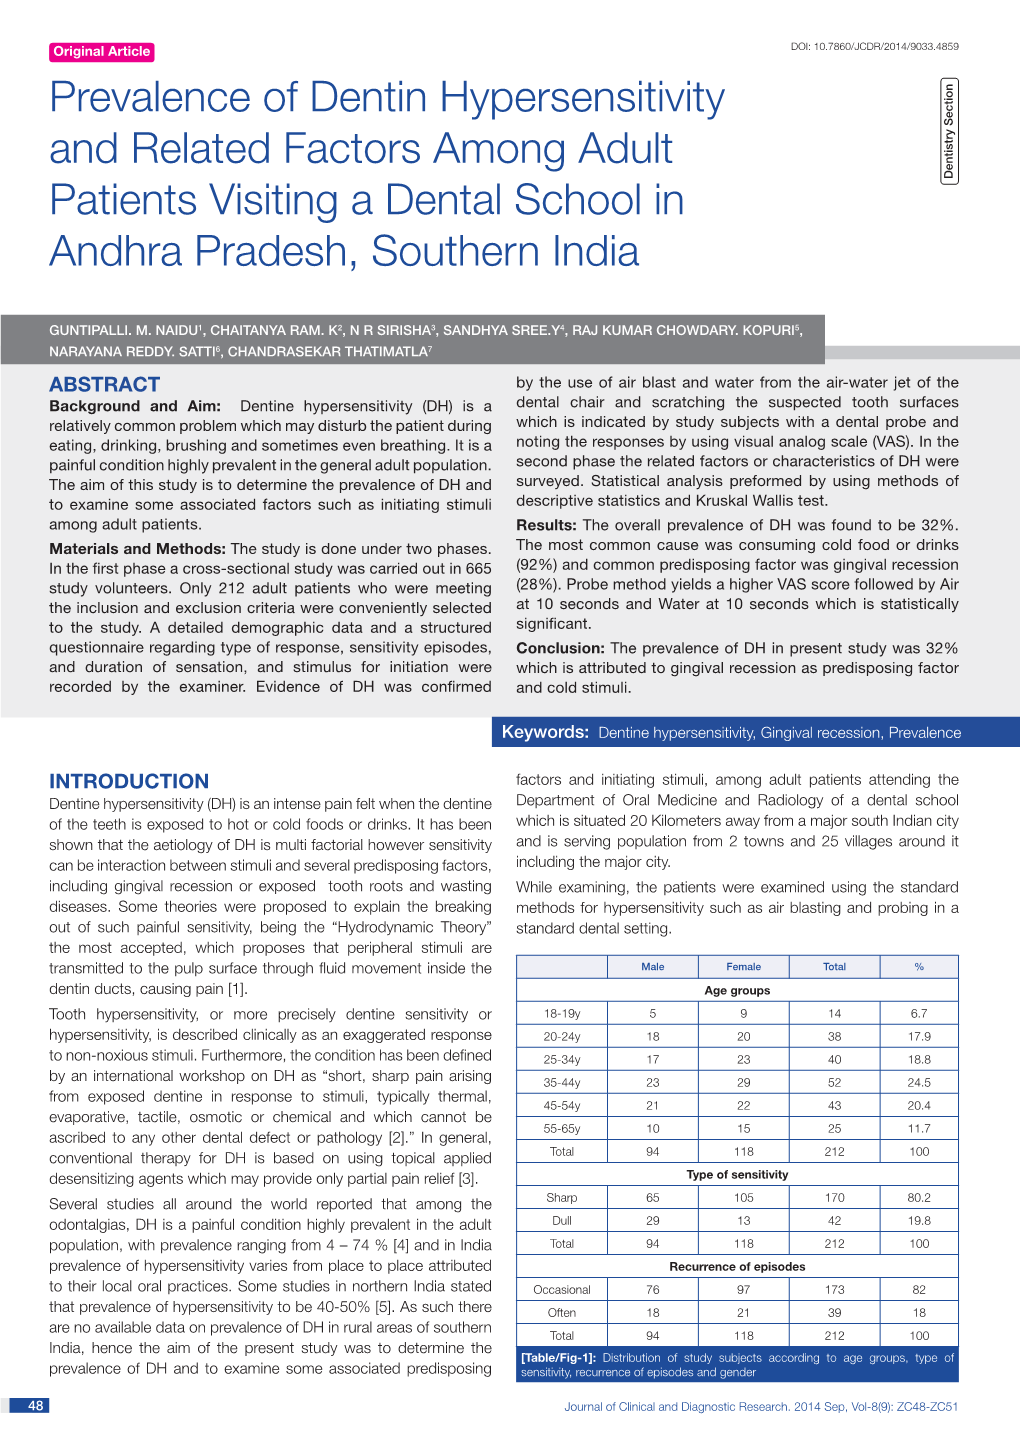 Prevalence of Dentin Hypersensitivity and Related Factors Among Adult Dentistry Section Patients Visiting a Dental School in Andhra Pradesh, Southern India